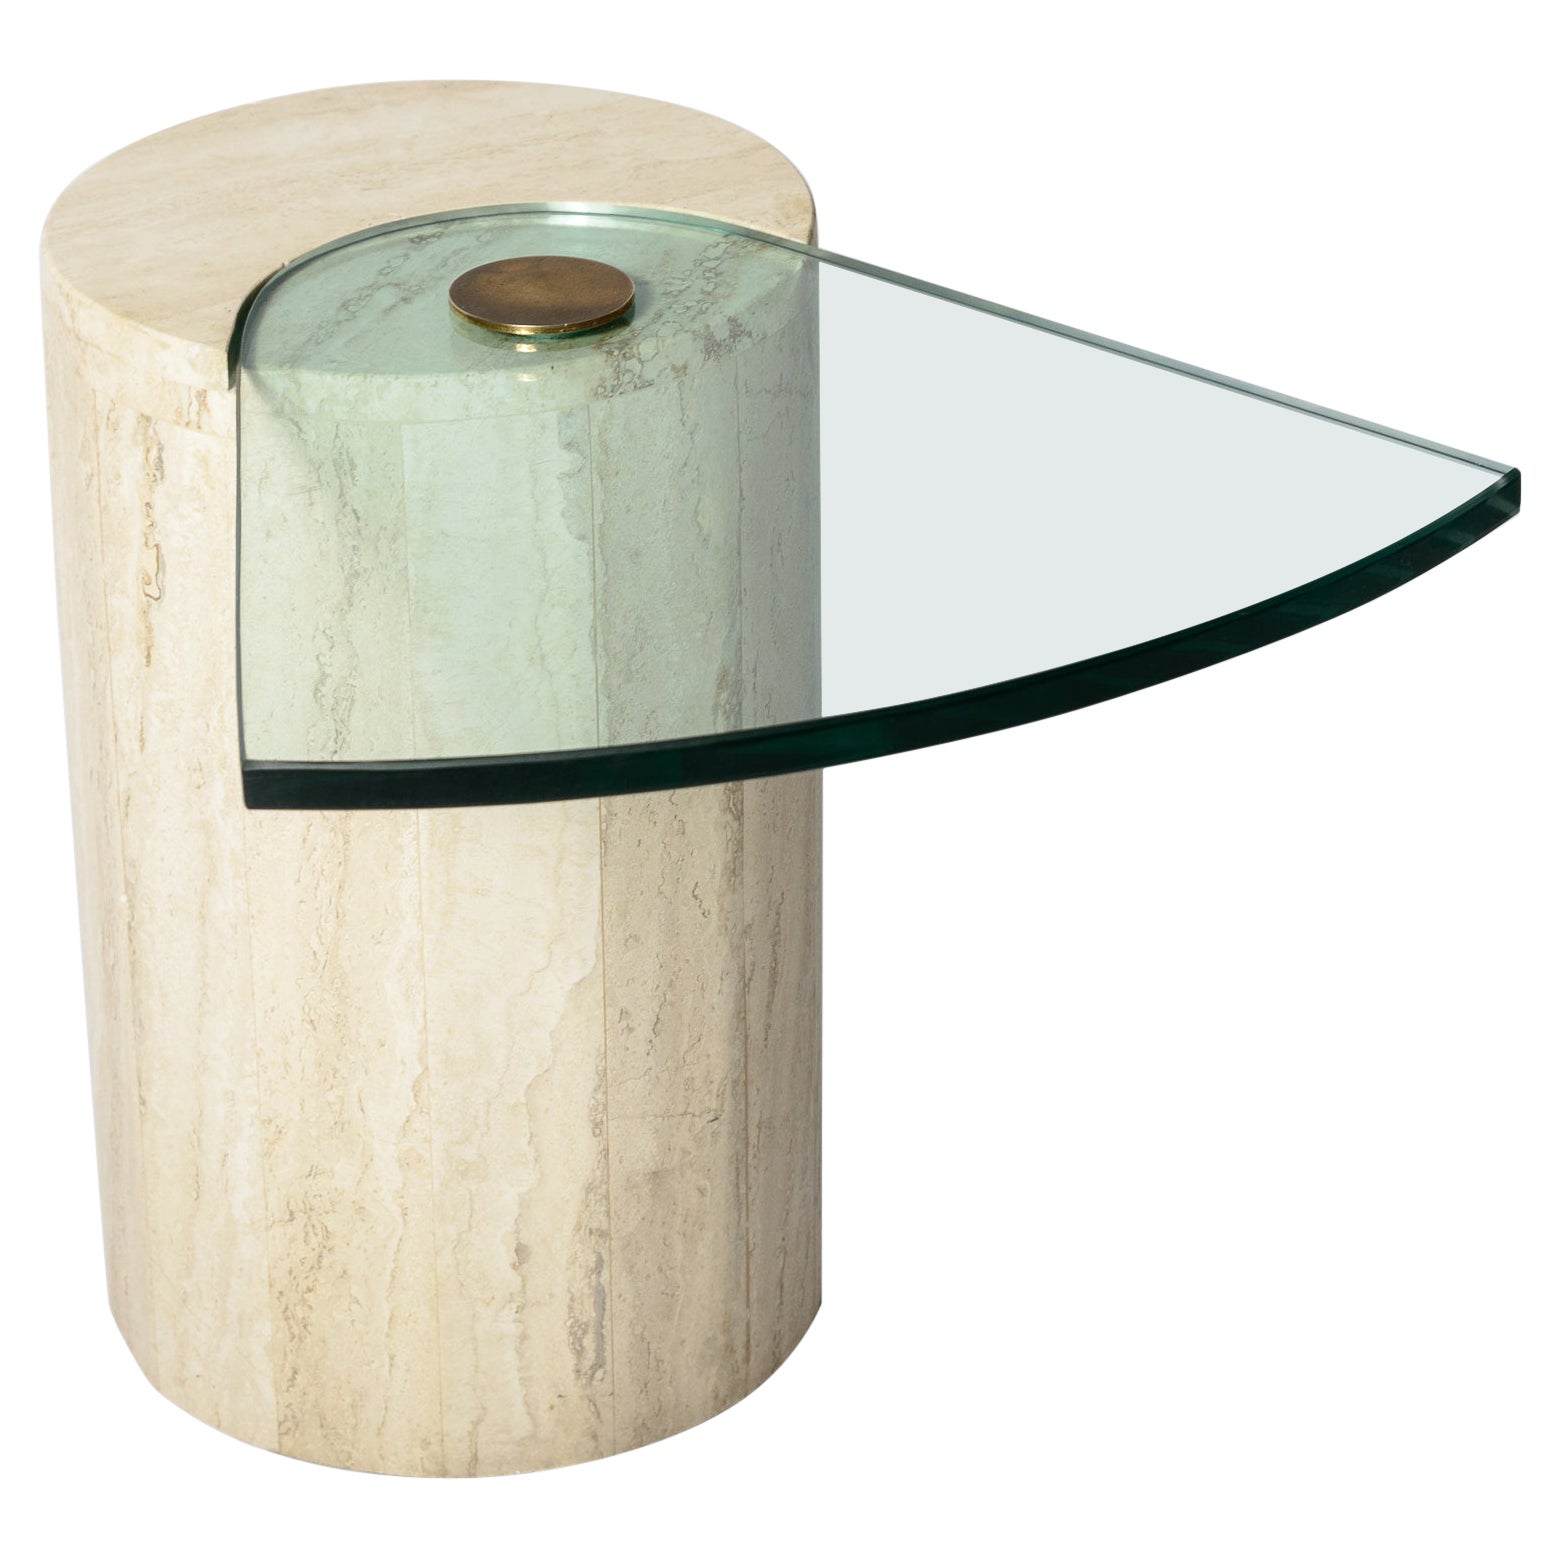  Tessellated Stone with Cantilevered glass Table  For Sale